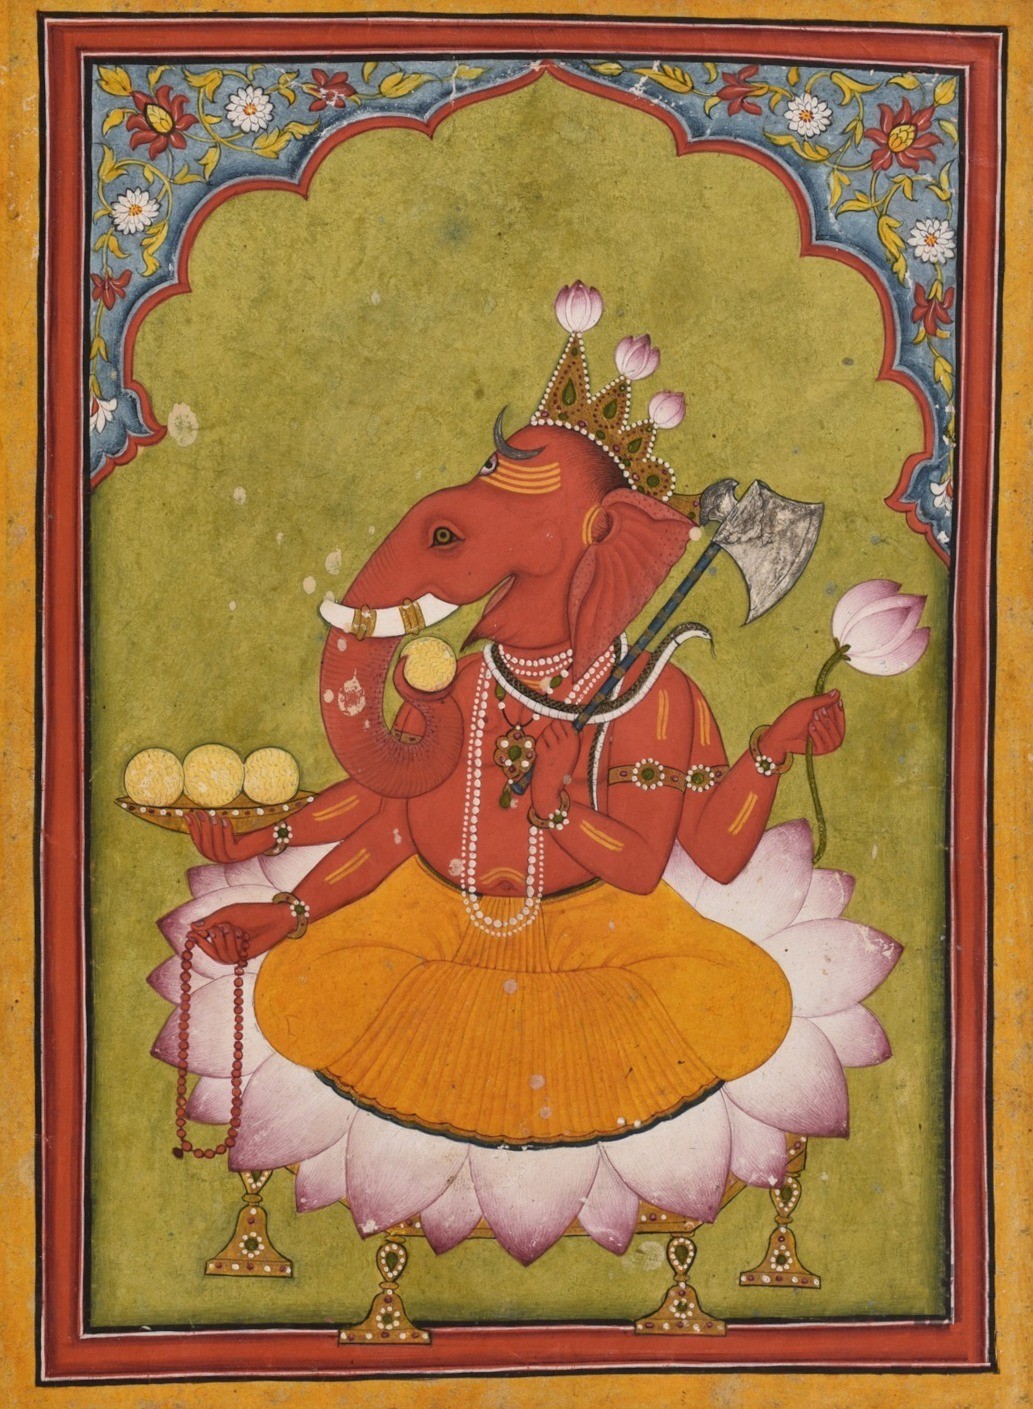 By Unknown author - http://www.museumsofindia.gov.in/repository/record/nat_del-62-1768-43470, Public Domain, https://commons.wikimedia.org/w/index.php?curid=3358417